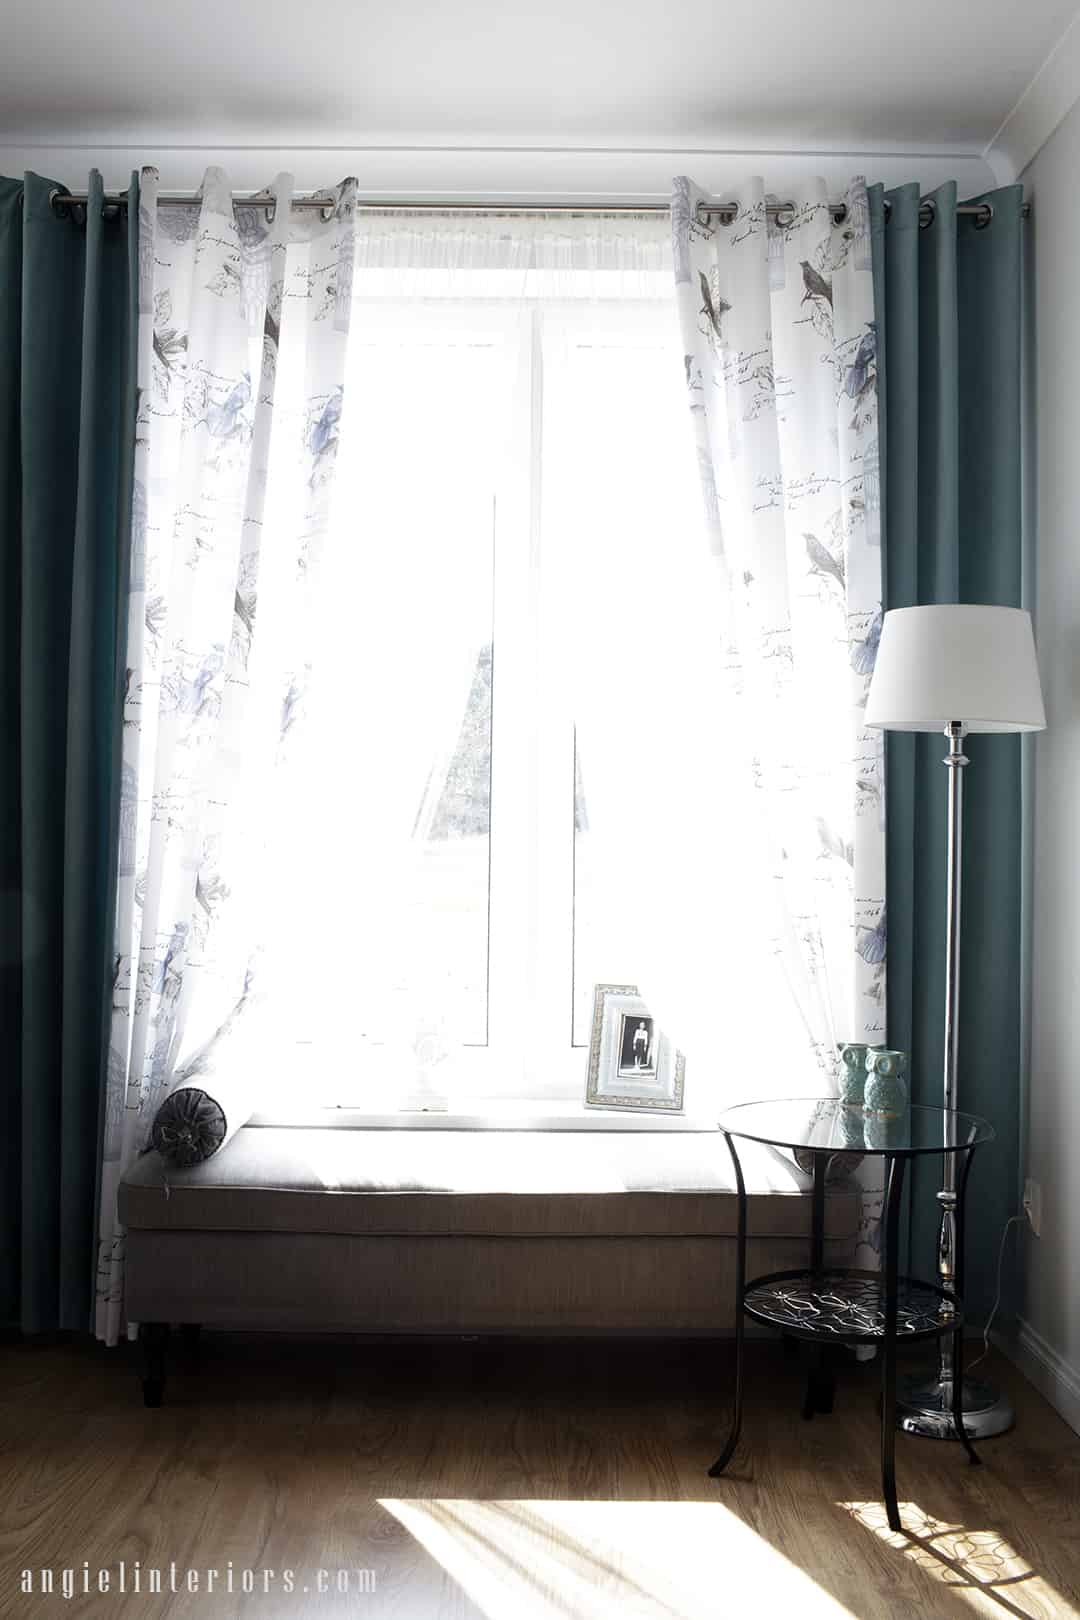 ikea stocksund bench at window with turquoise curtains